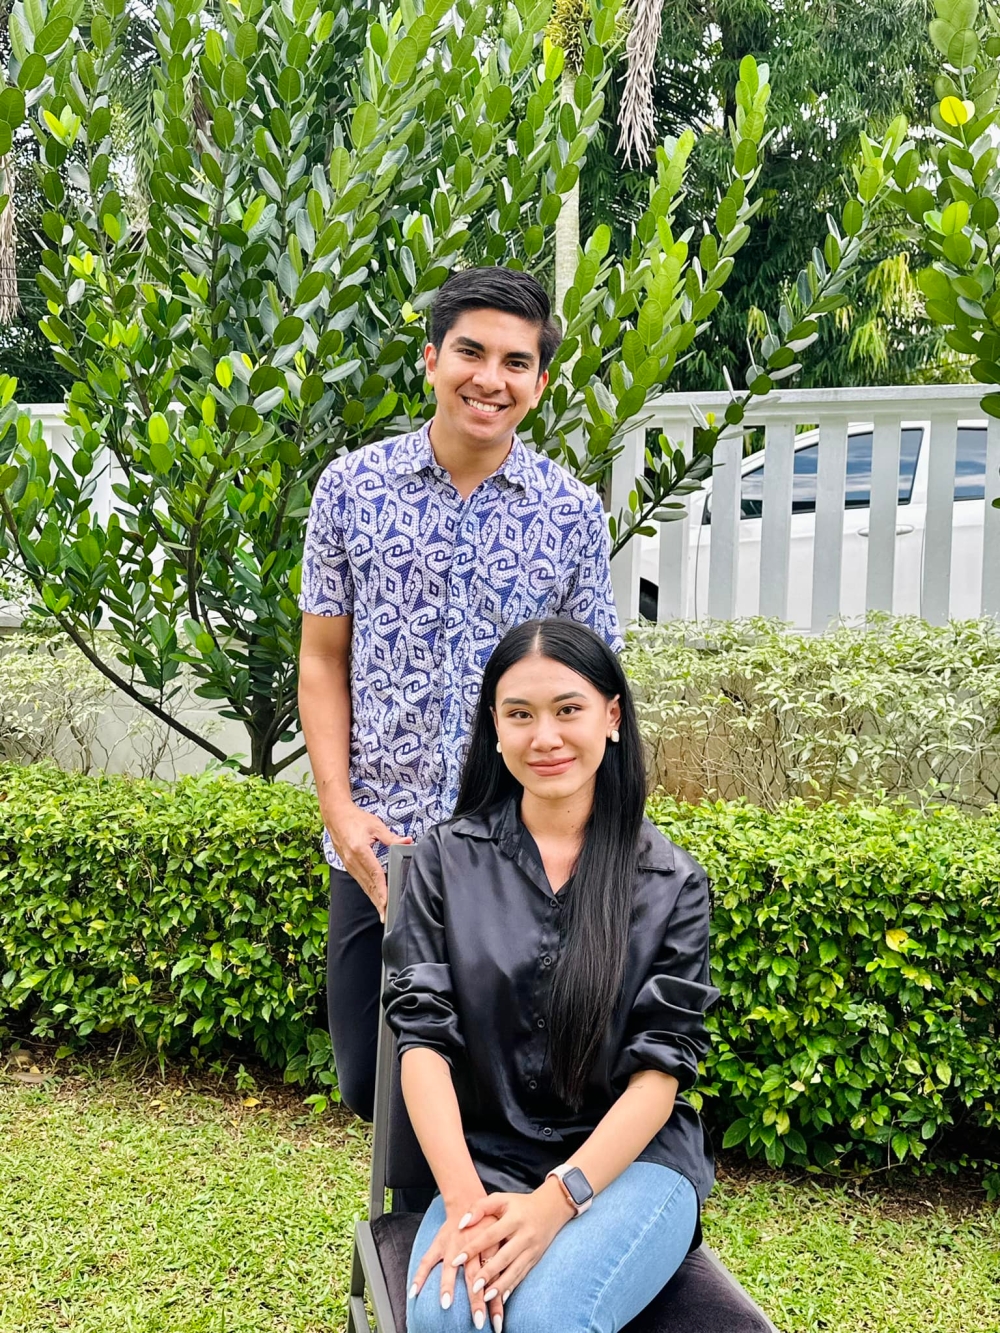 Muar MP Syed Saddiq Abdul Rahman is seen here with Penang-born woman Melissa who is still without a Malaysian identity card at age 21. — Picture courtesy of Facebook/ Syed Saddiq Abdul Rahman